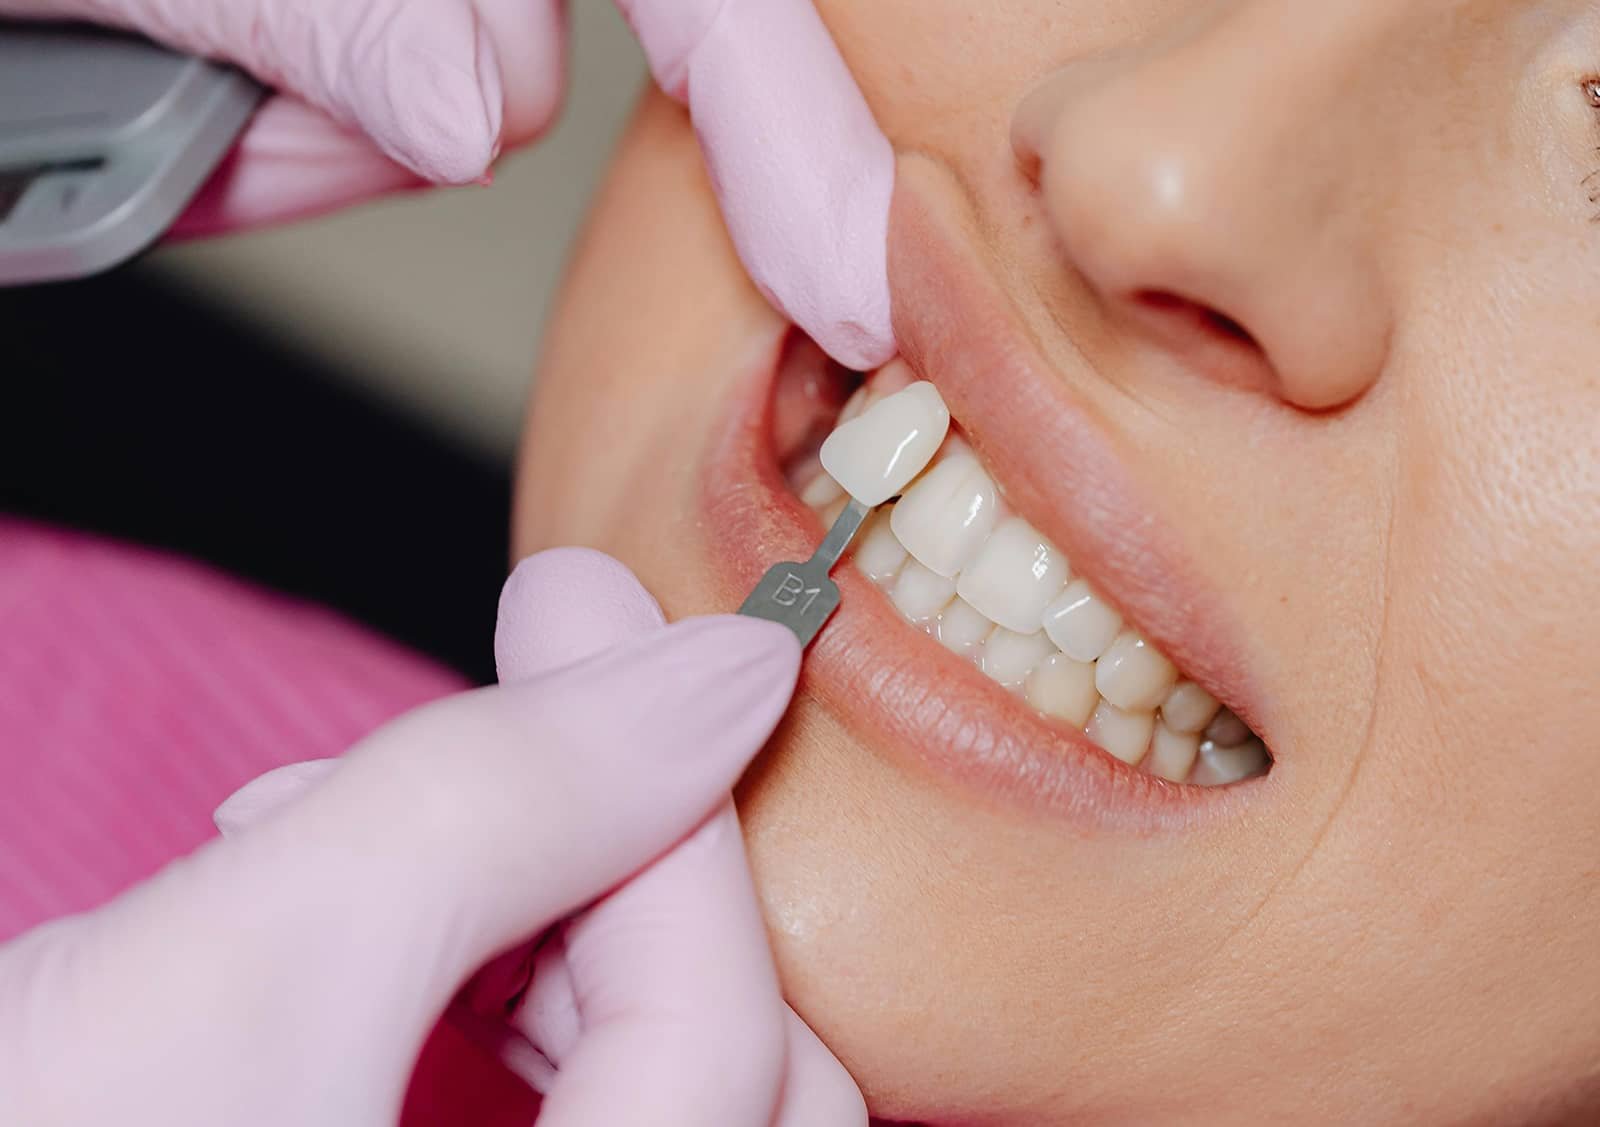 Best value cosmetic dentist in Scarborough - High-quality dental implants for tooth replacement